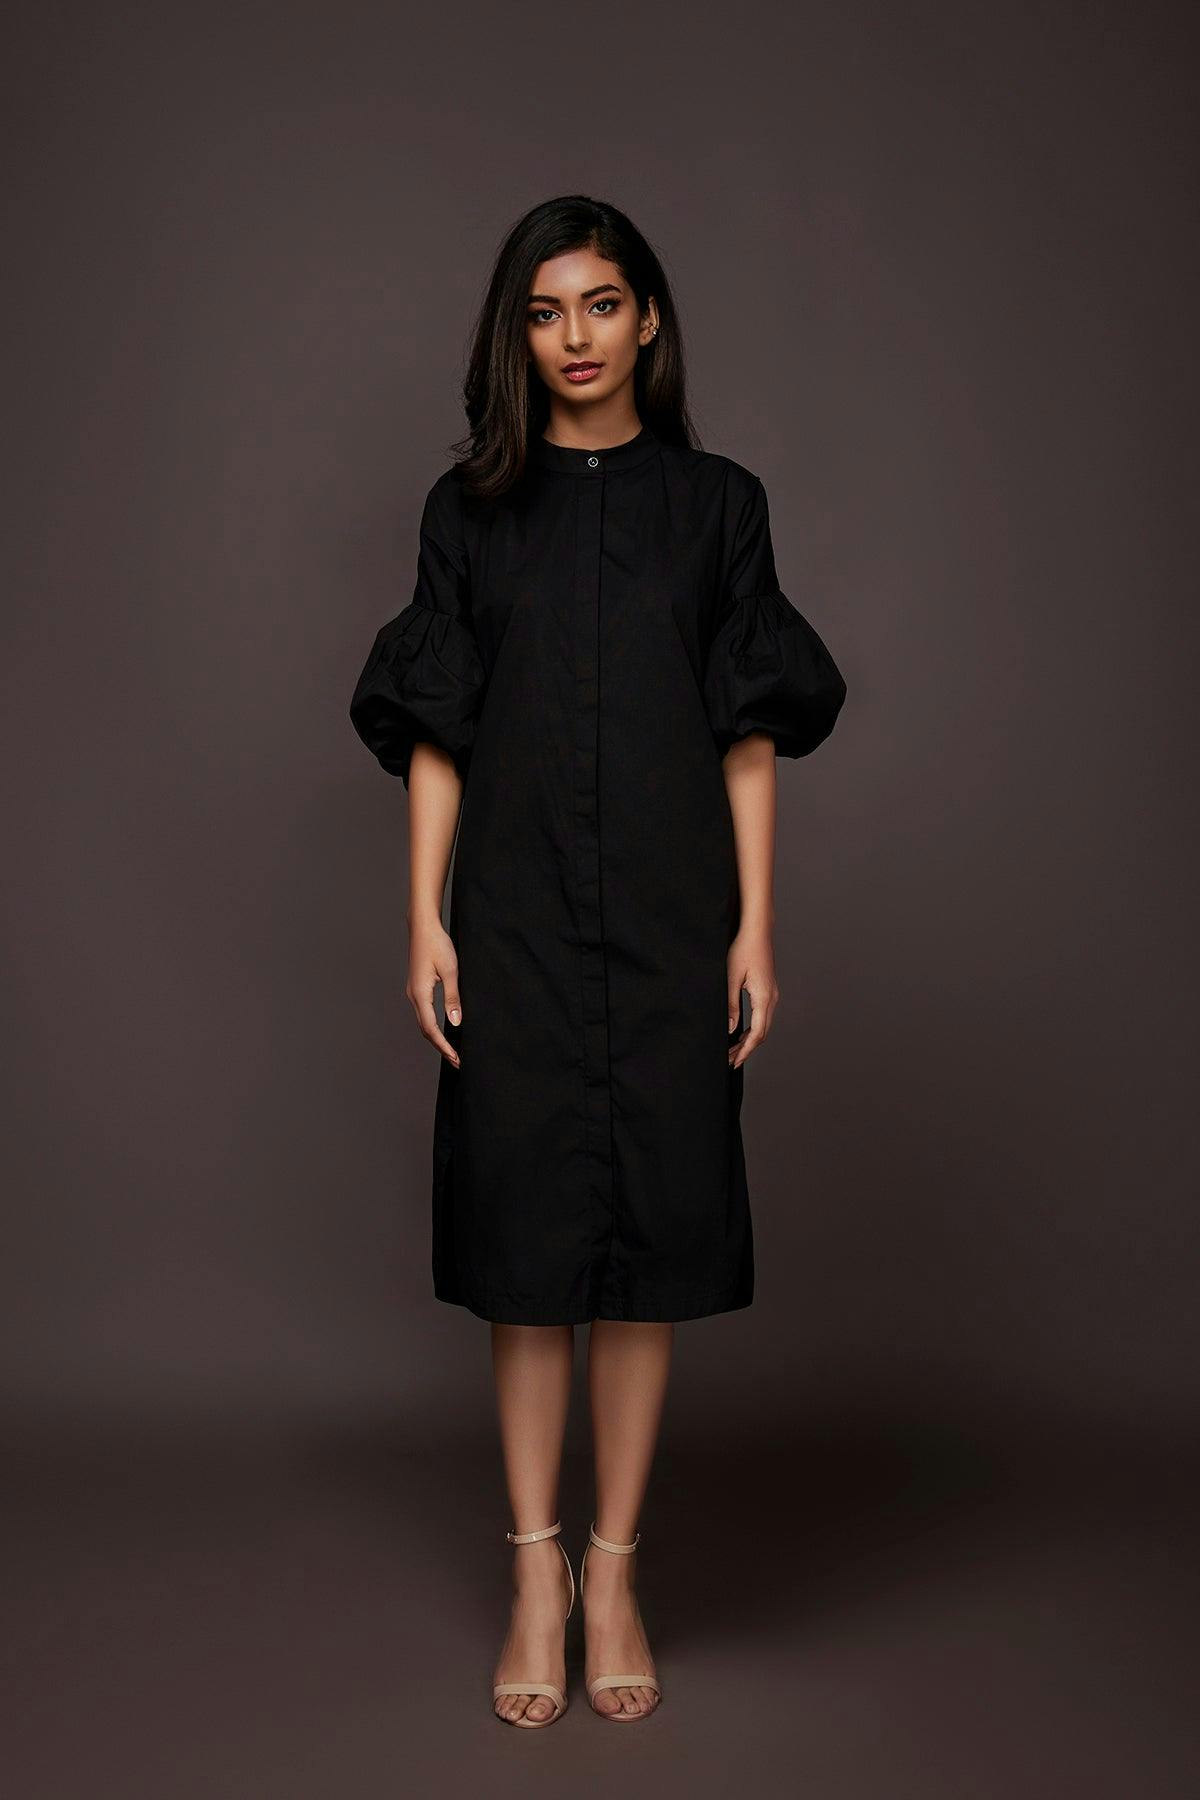 NN-1127 ::: Black Shirt With Back Embroidered Panel, a product by Deepika Arora